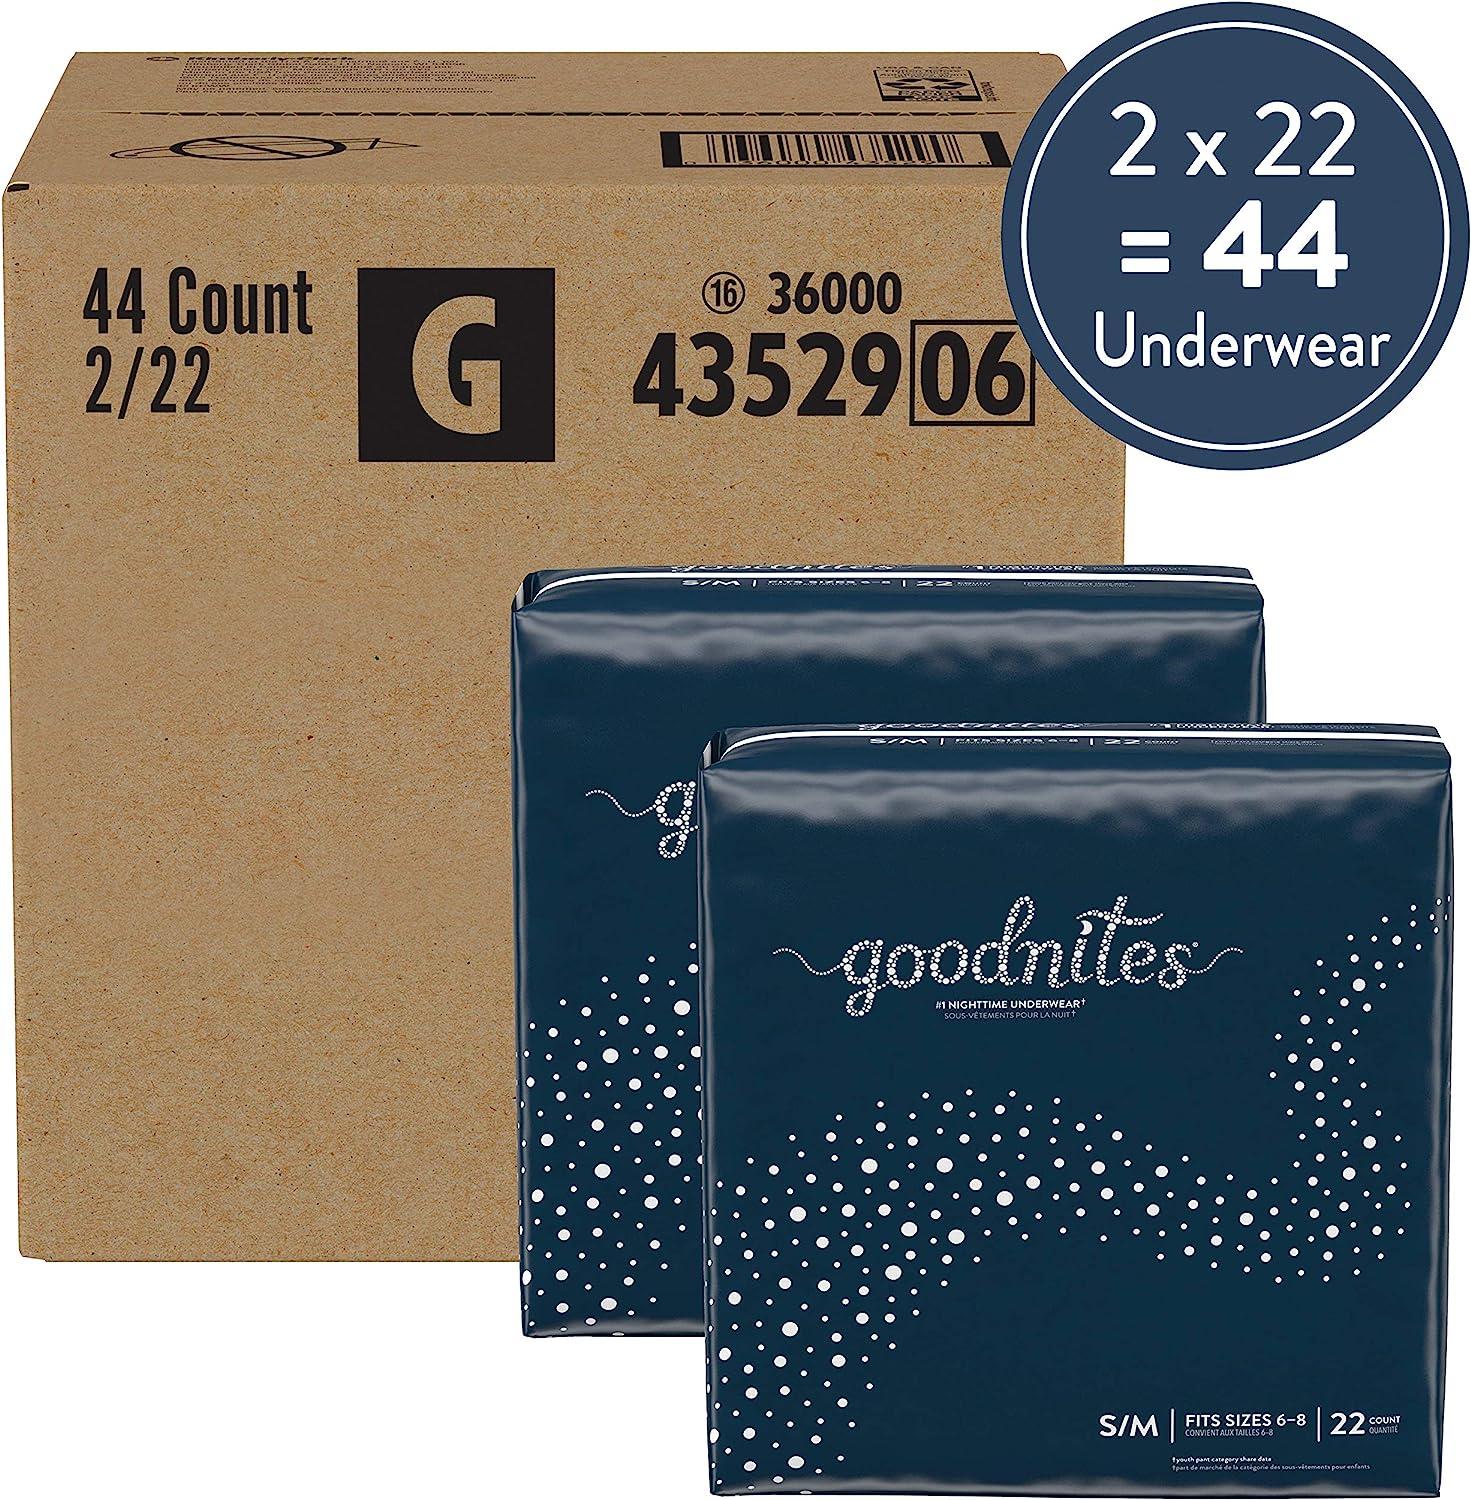 Kimberly Clark GoodNites Youth Absorbent Underwear, Pull On with